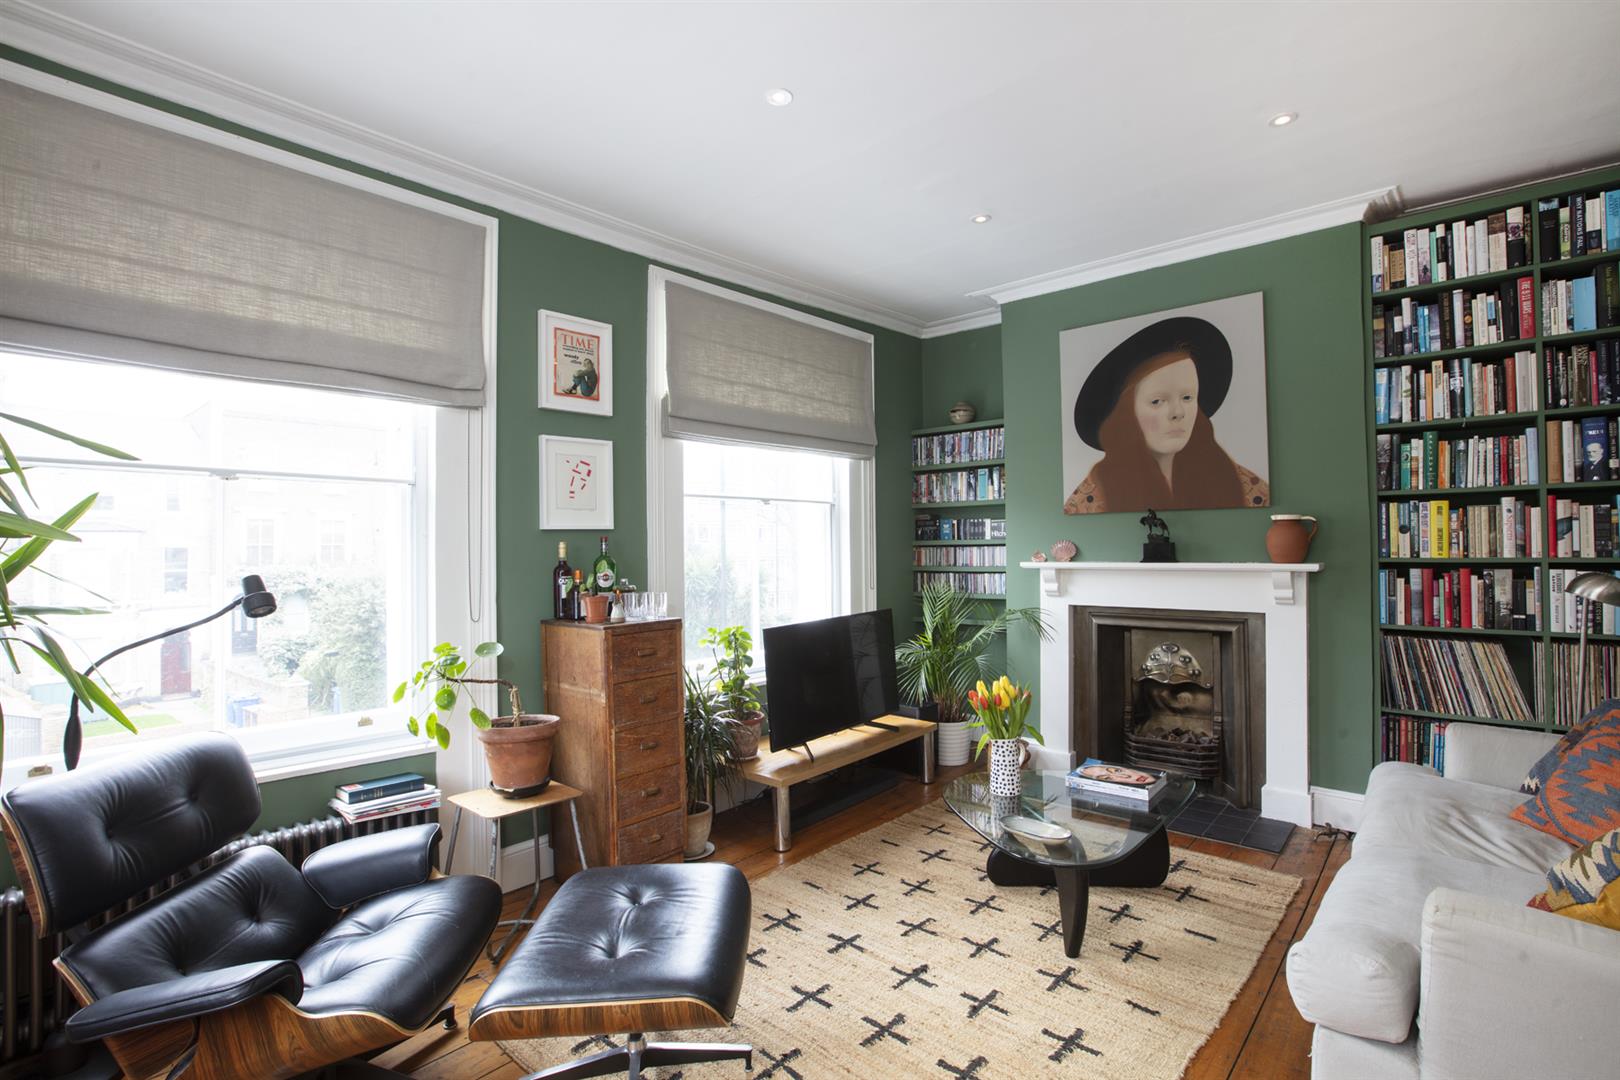 Flat - Conversion Sold in Peckham Road, Camberwell, SE5 1049 view2